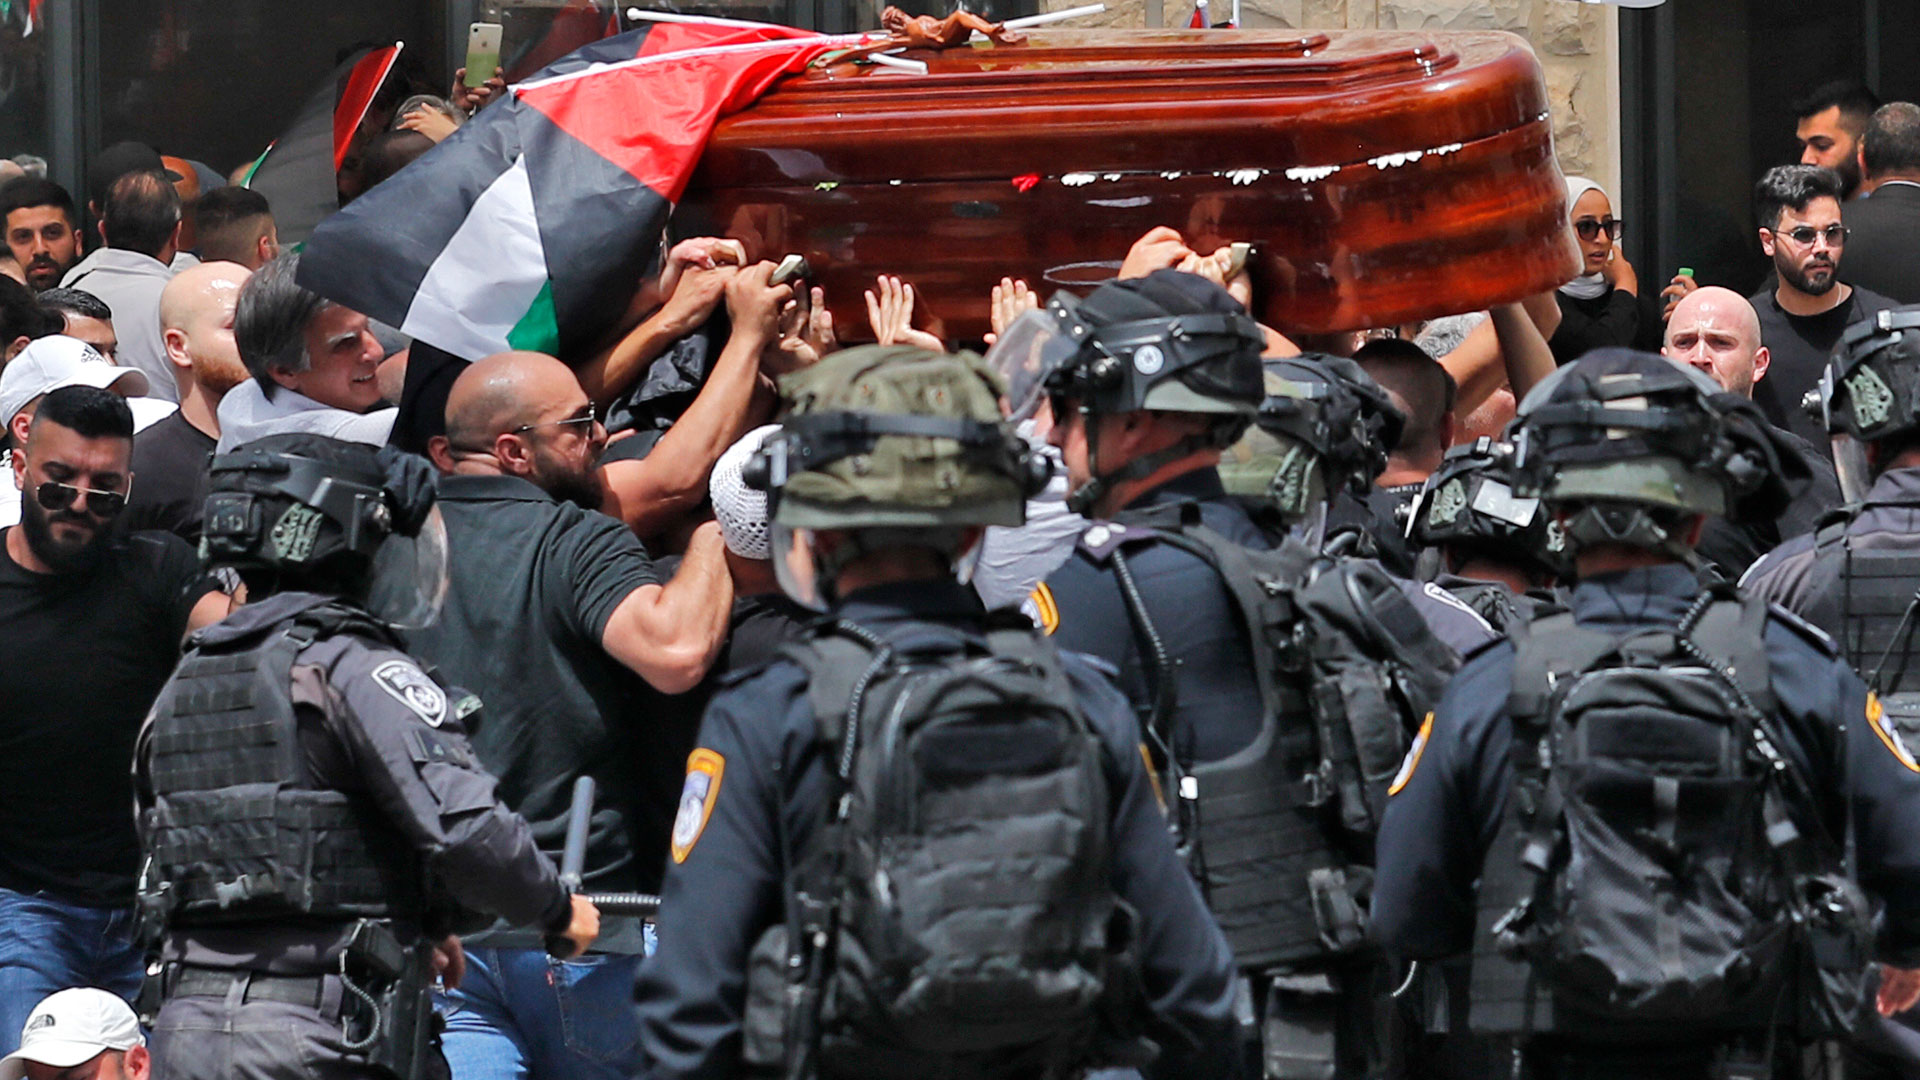 The journalist's coffin was moved through the streets amid police riots with protesters (AFP)